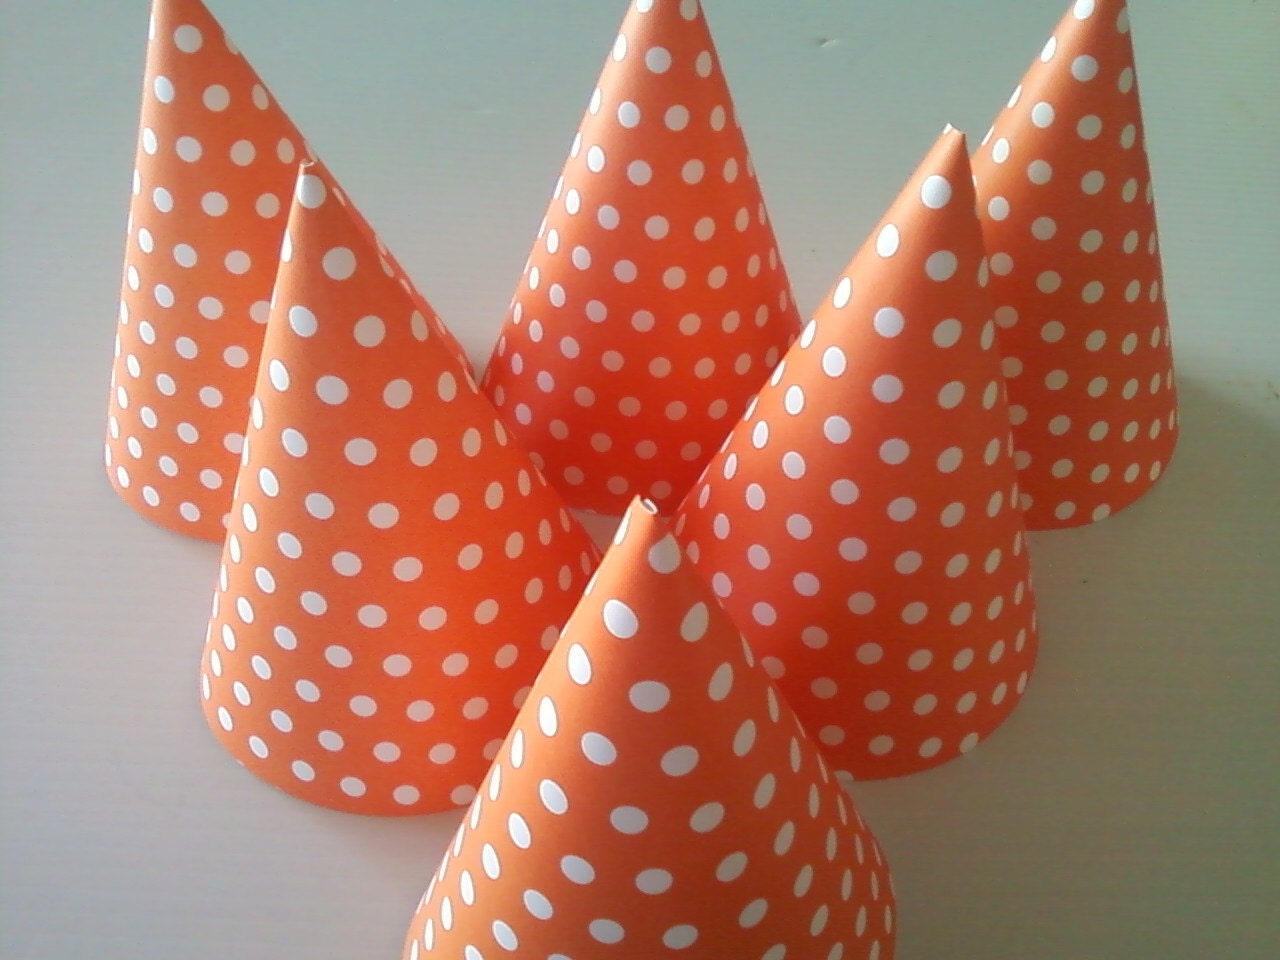  ORANGE Polka Dot Party Hat Set of 5 Perfect for Carnival